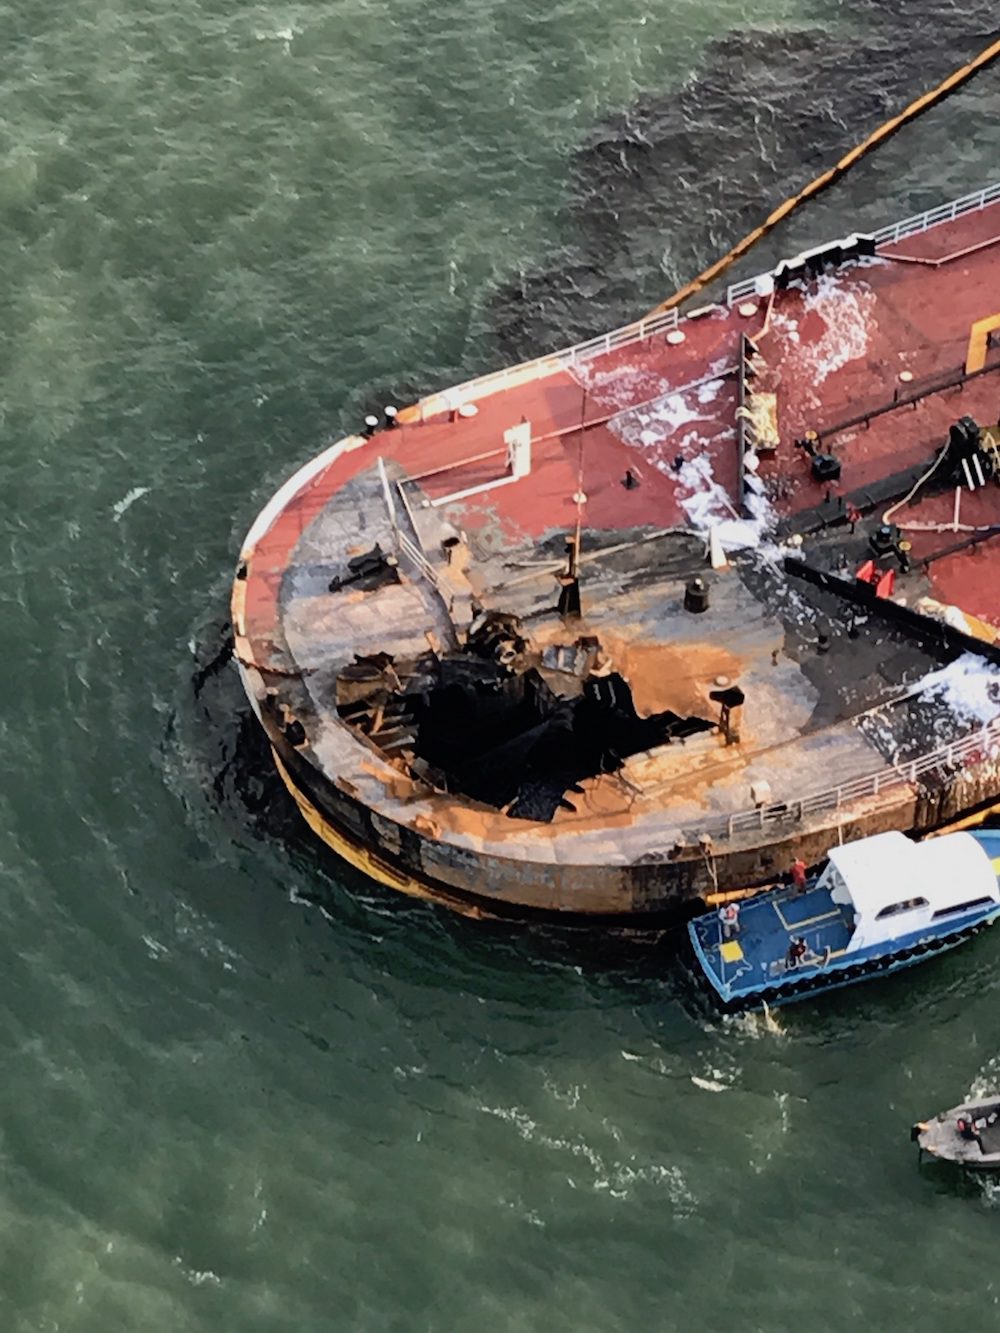 Oil Cleanup Continues in Texas After Barge Explosion, Fire